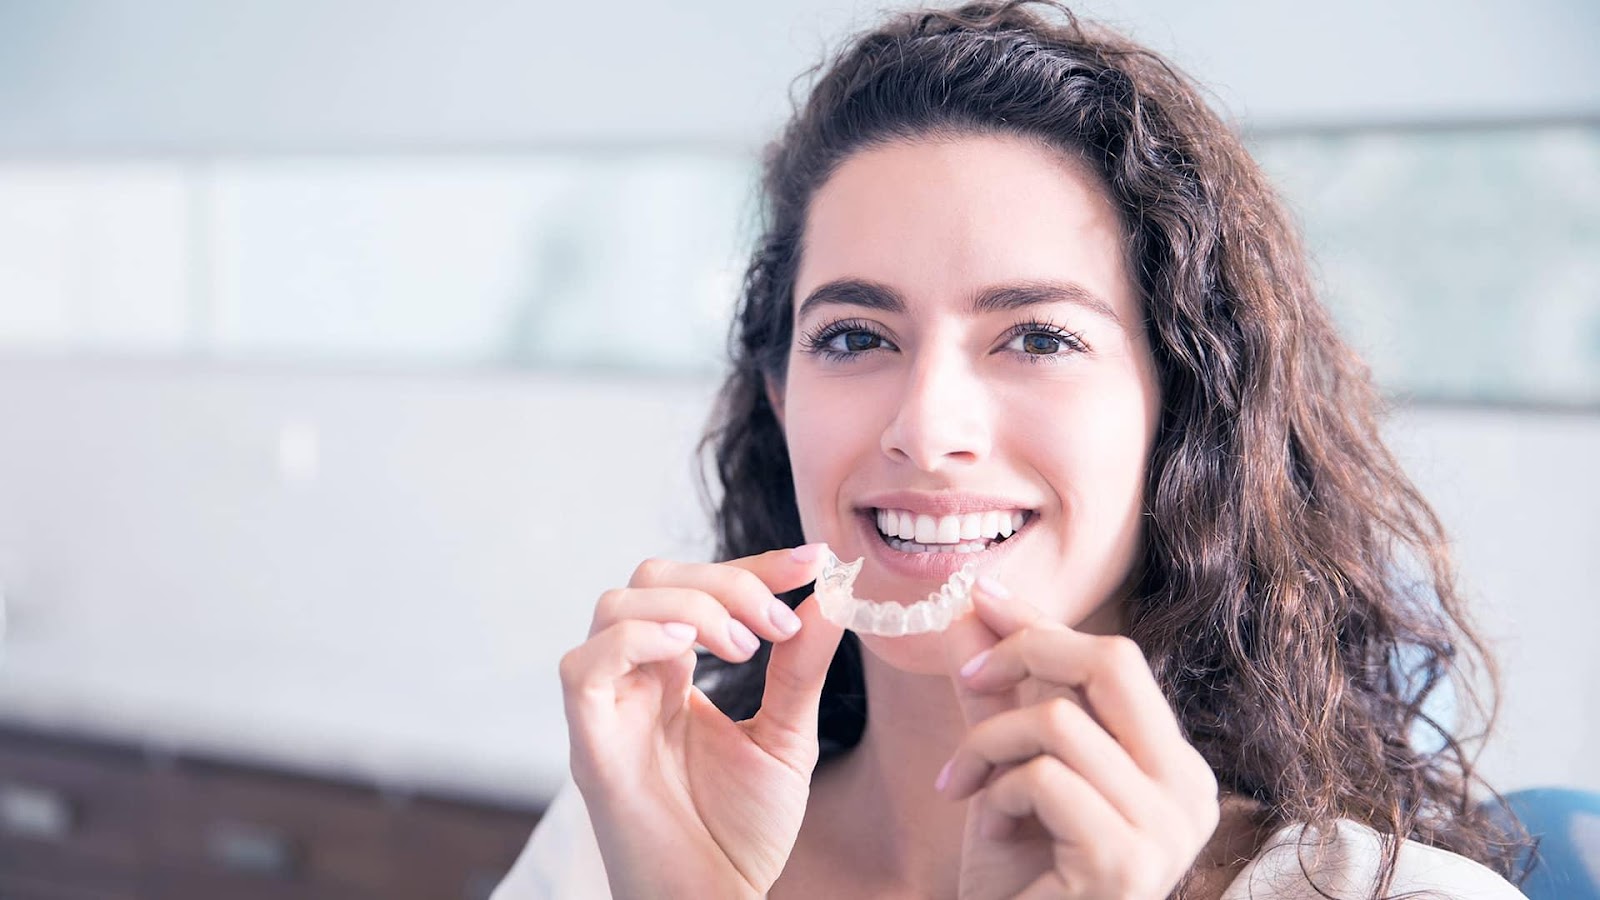 Invisalign-Great-Beautiful-Perfectly-Aligned-Smile-Beyond-Dental-Care-Cosmetic-Dental-Services.jpg